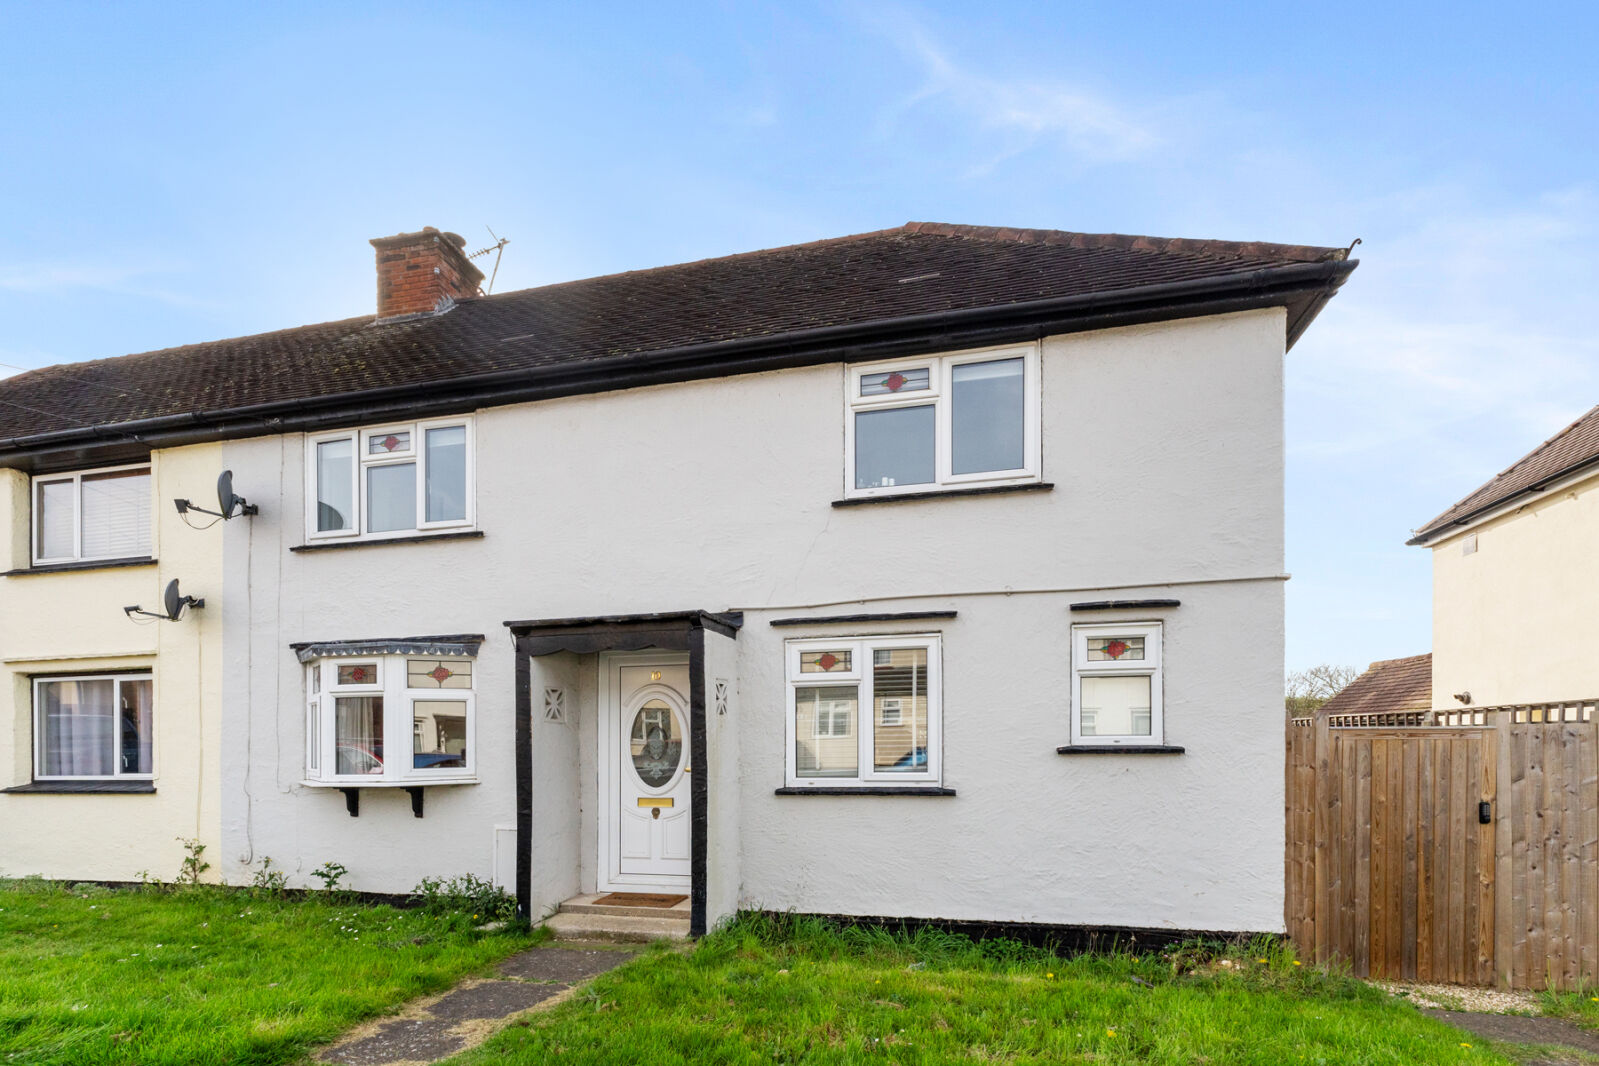 3 bedroom semi detached house for sale Stoneyfield Drive, Stansted, CM24, main image